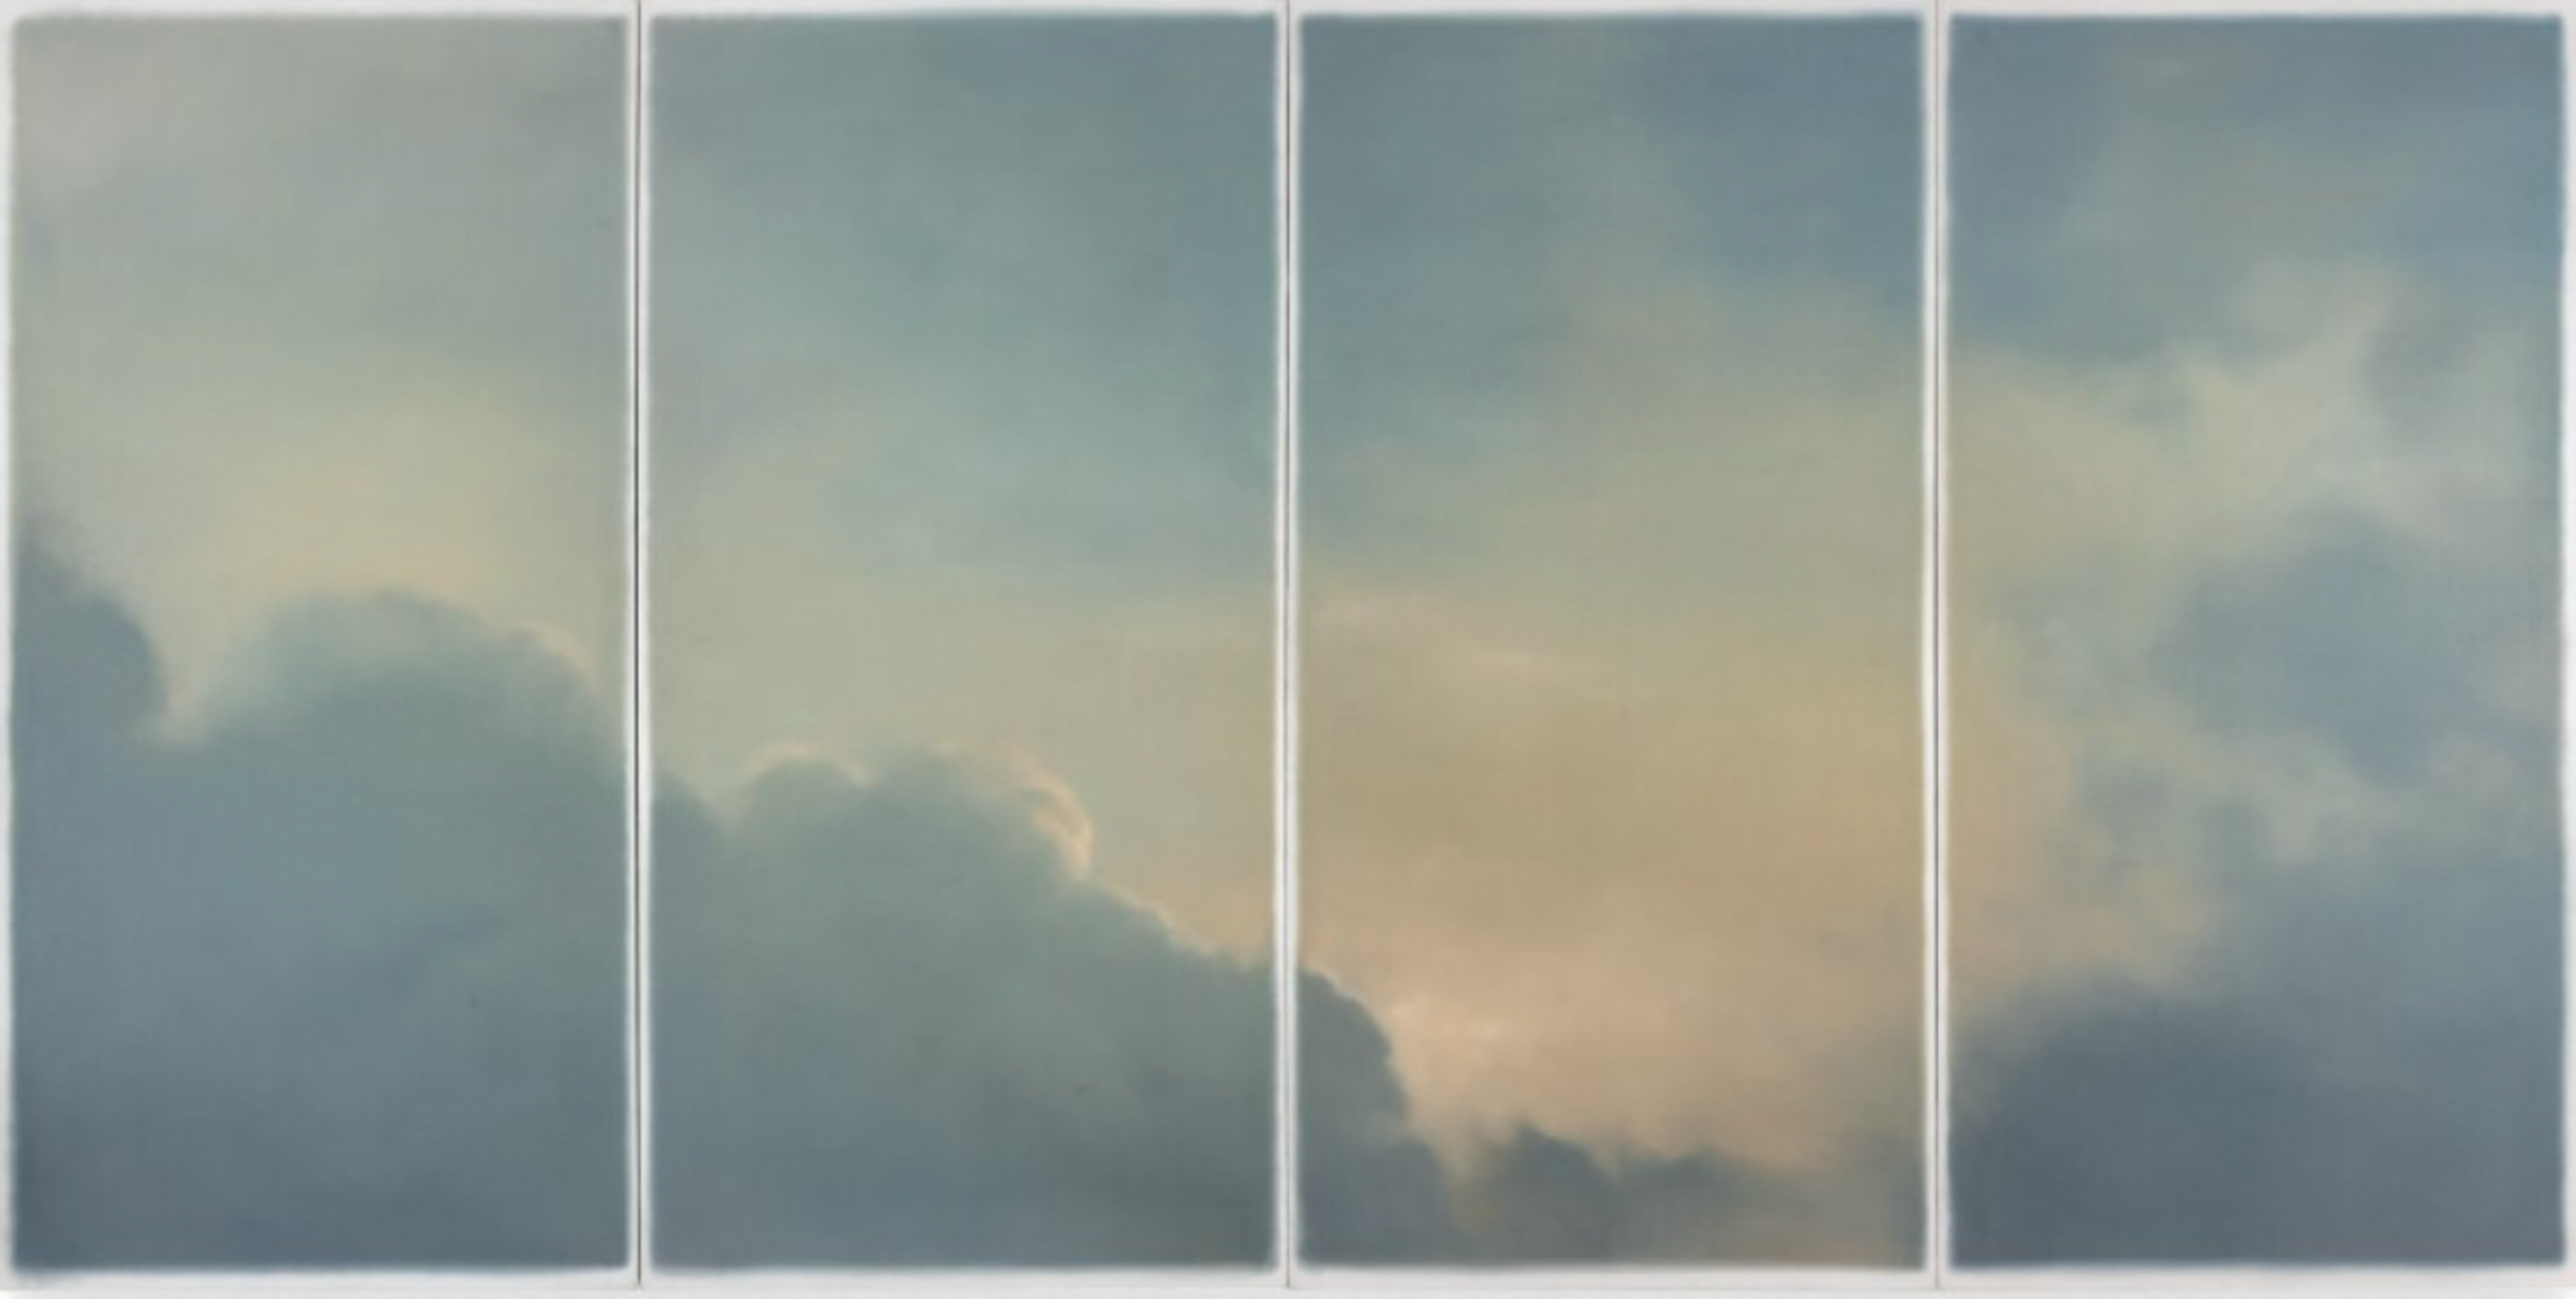 Painting by Gerhard Richter, featuring a cloudscape in muted blue and yellow, divided into four panels, resembling a window view.